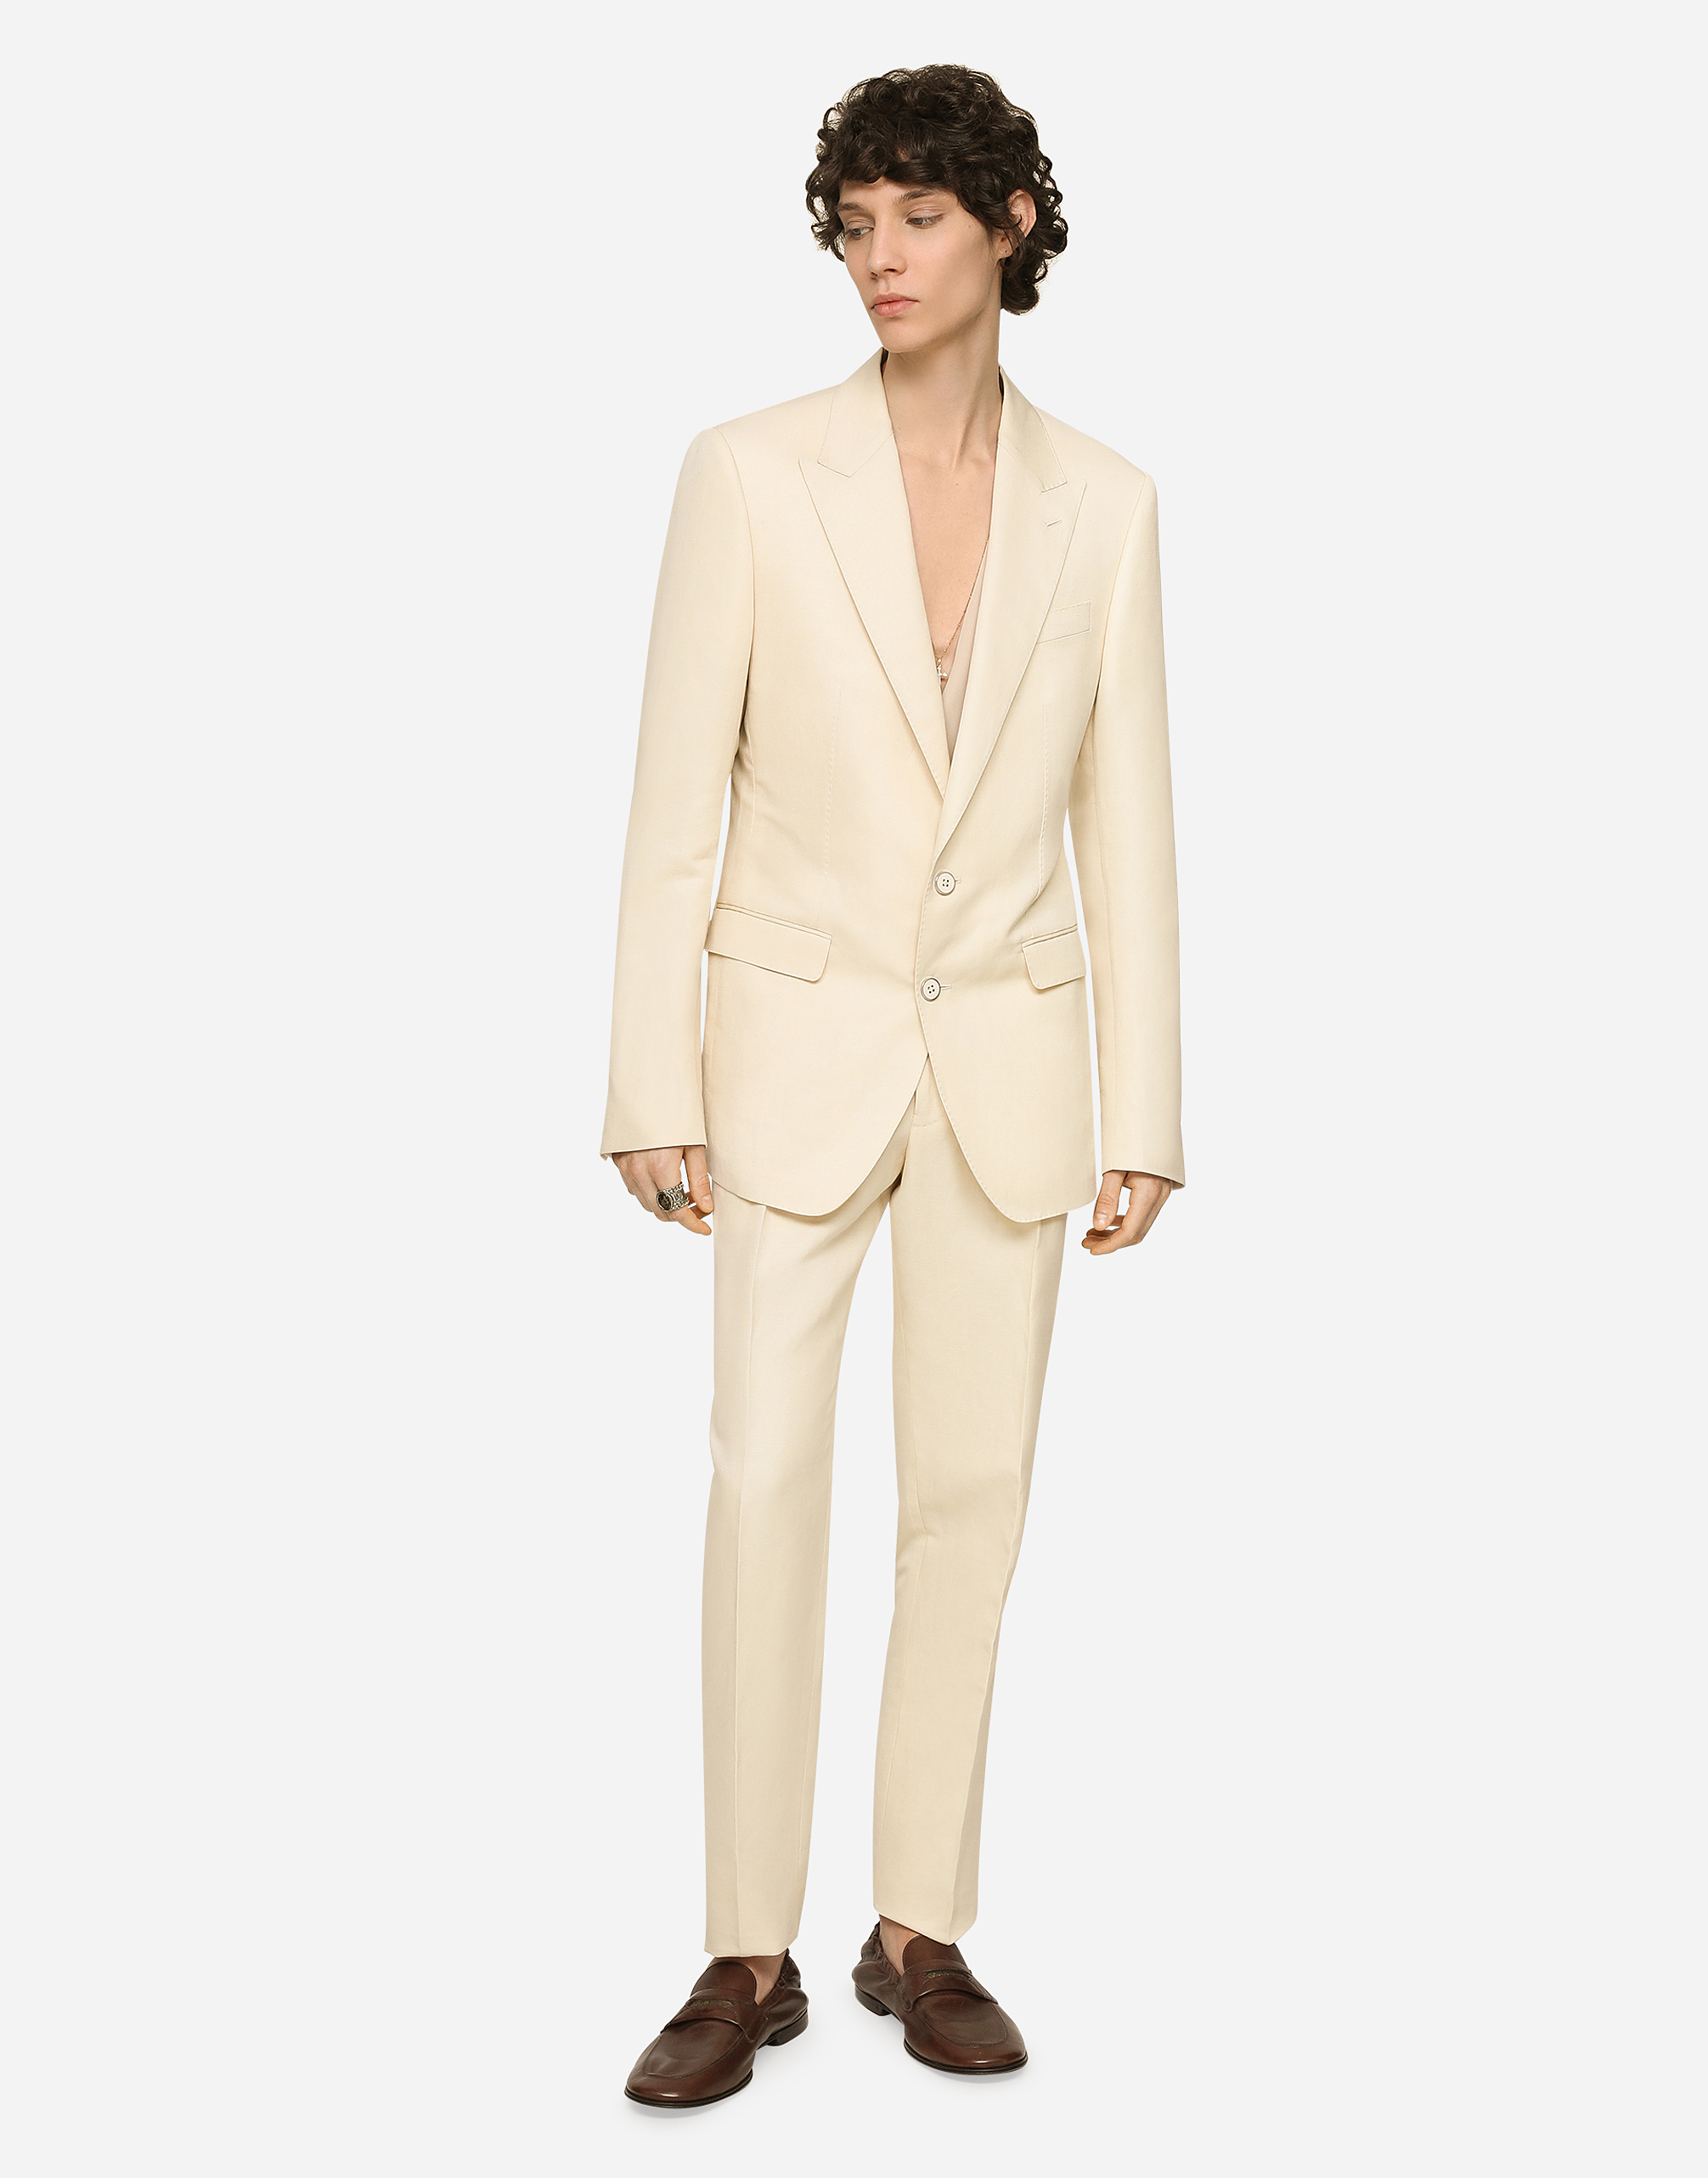 Single-breasted Taormina jacket in linen, cotton and silk in White 